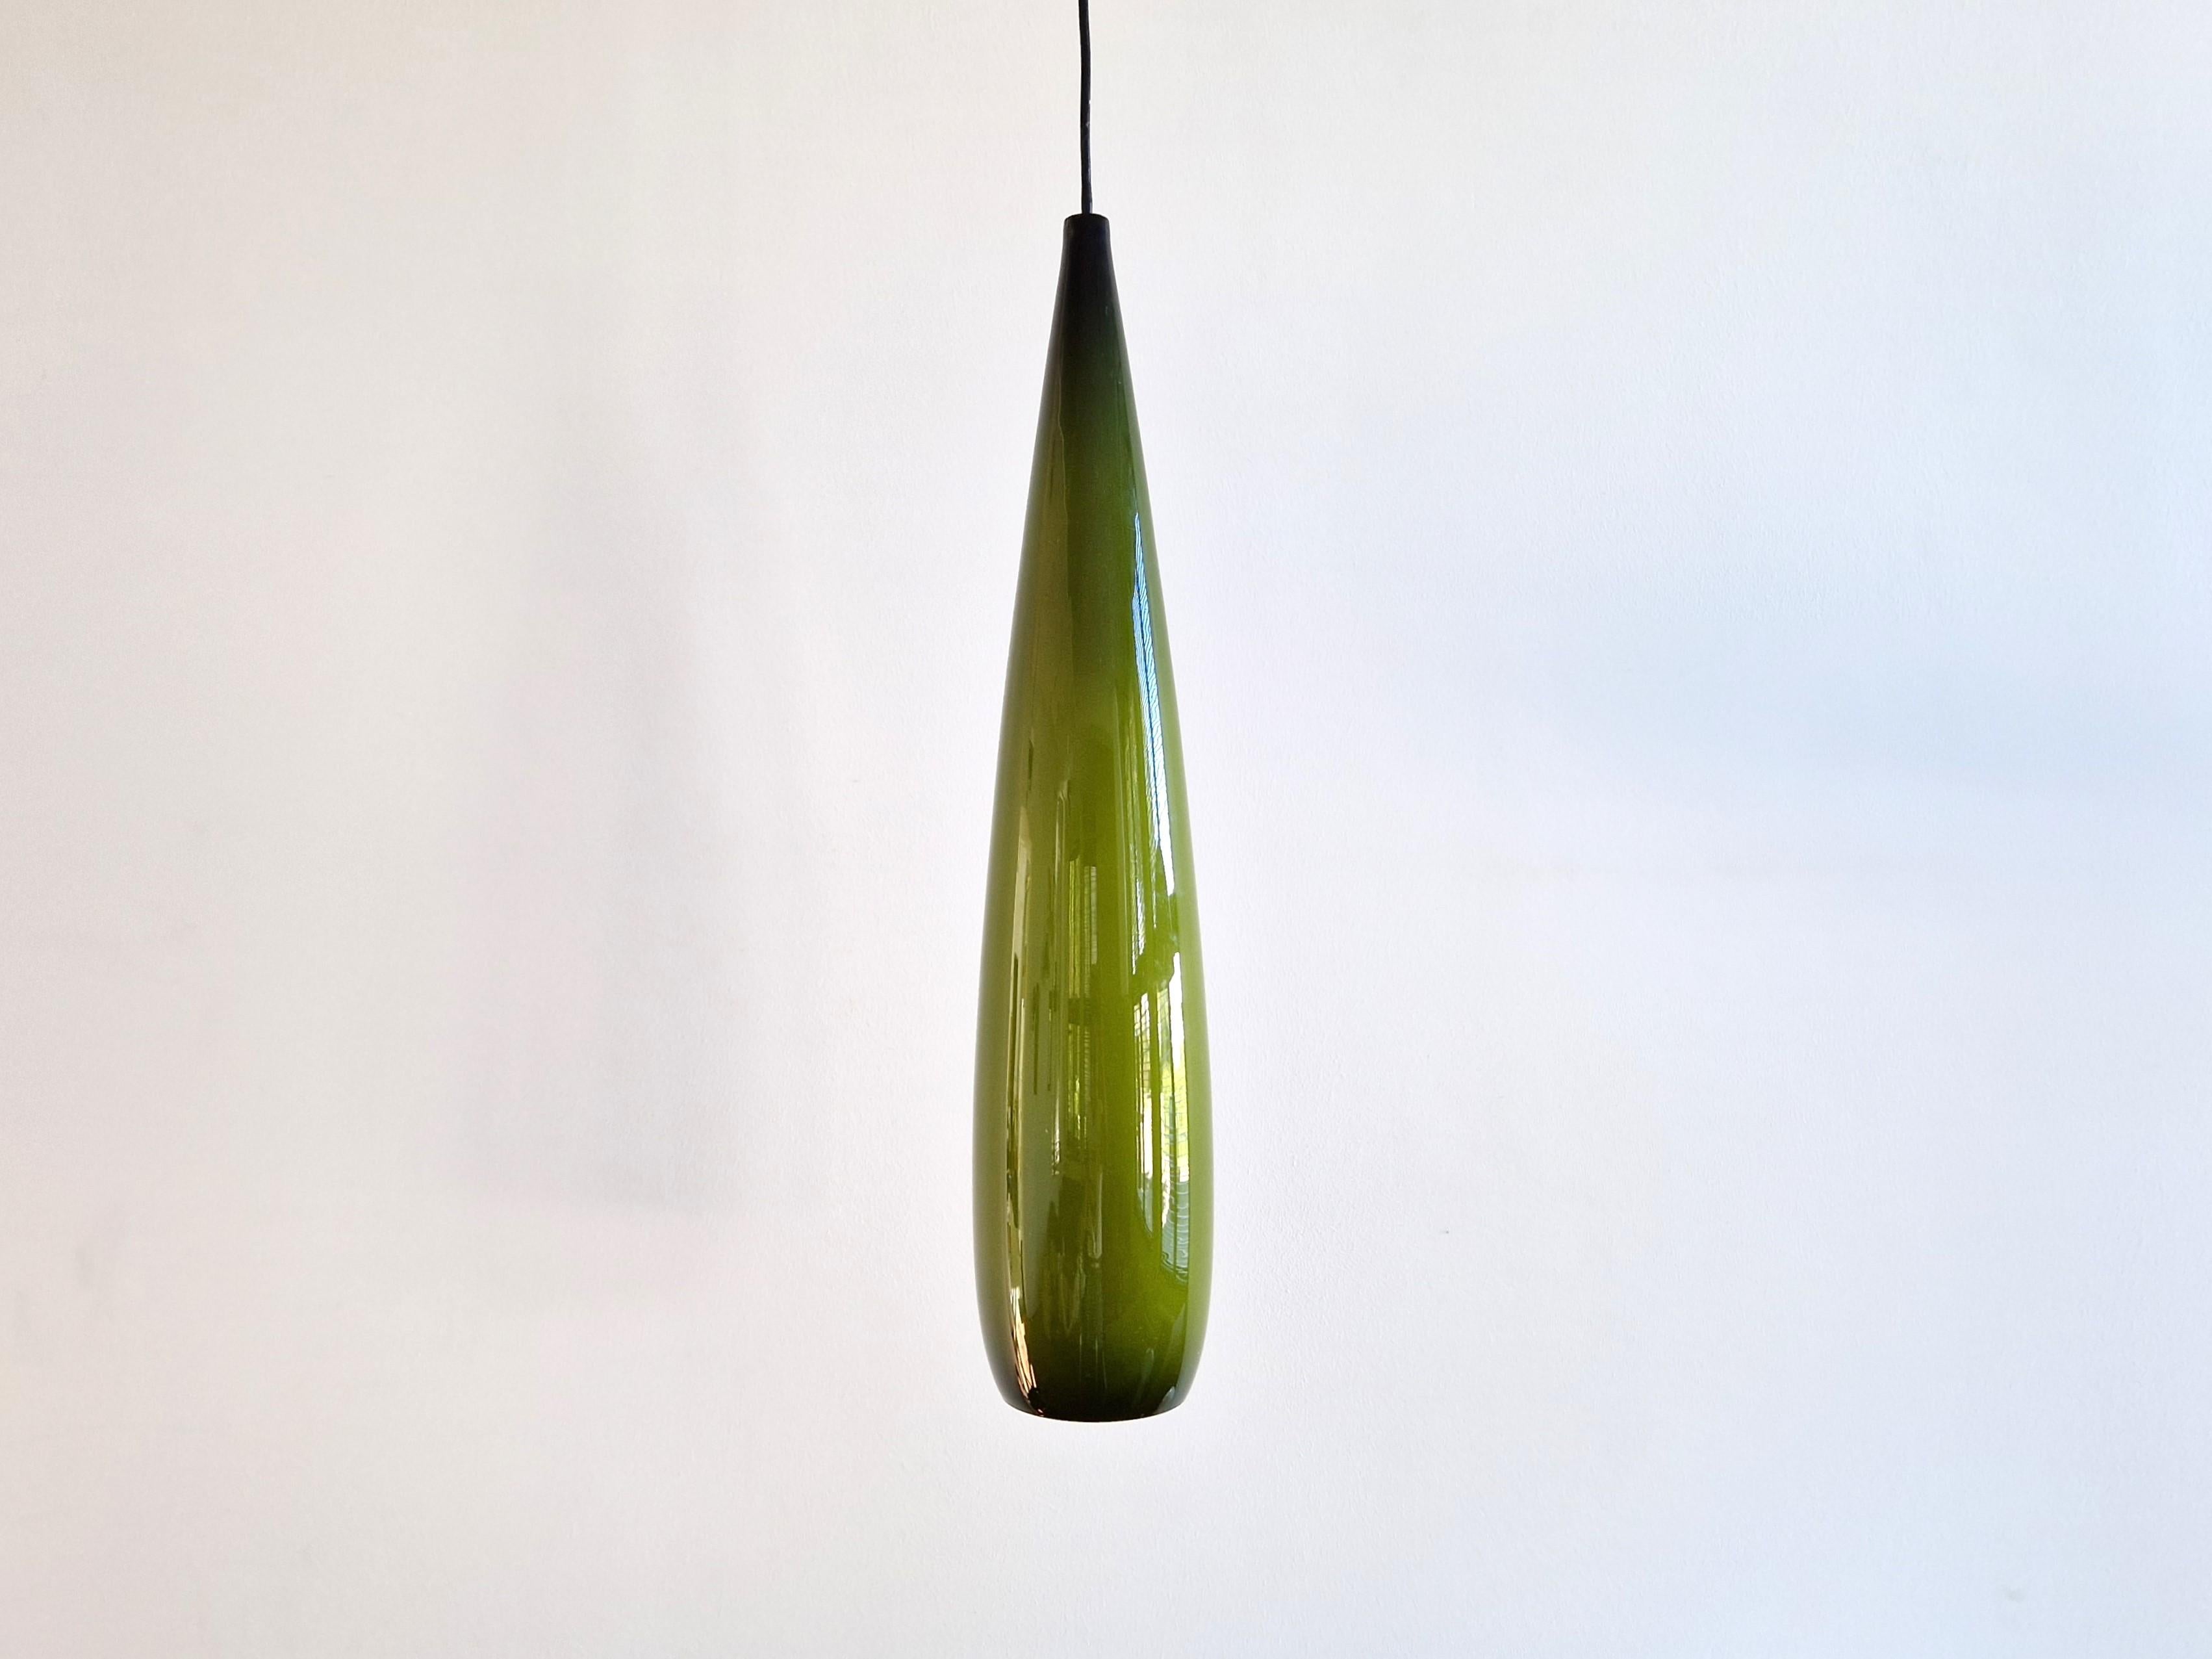 This fantastic pendant lamp was designed for Kastrup Holmegaard in Denmark. It is made out of green colored glass with a white opaline inside that gives a beautiful warm and soft light. The lamp is in a very good condition, with some small signs of